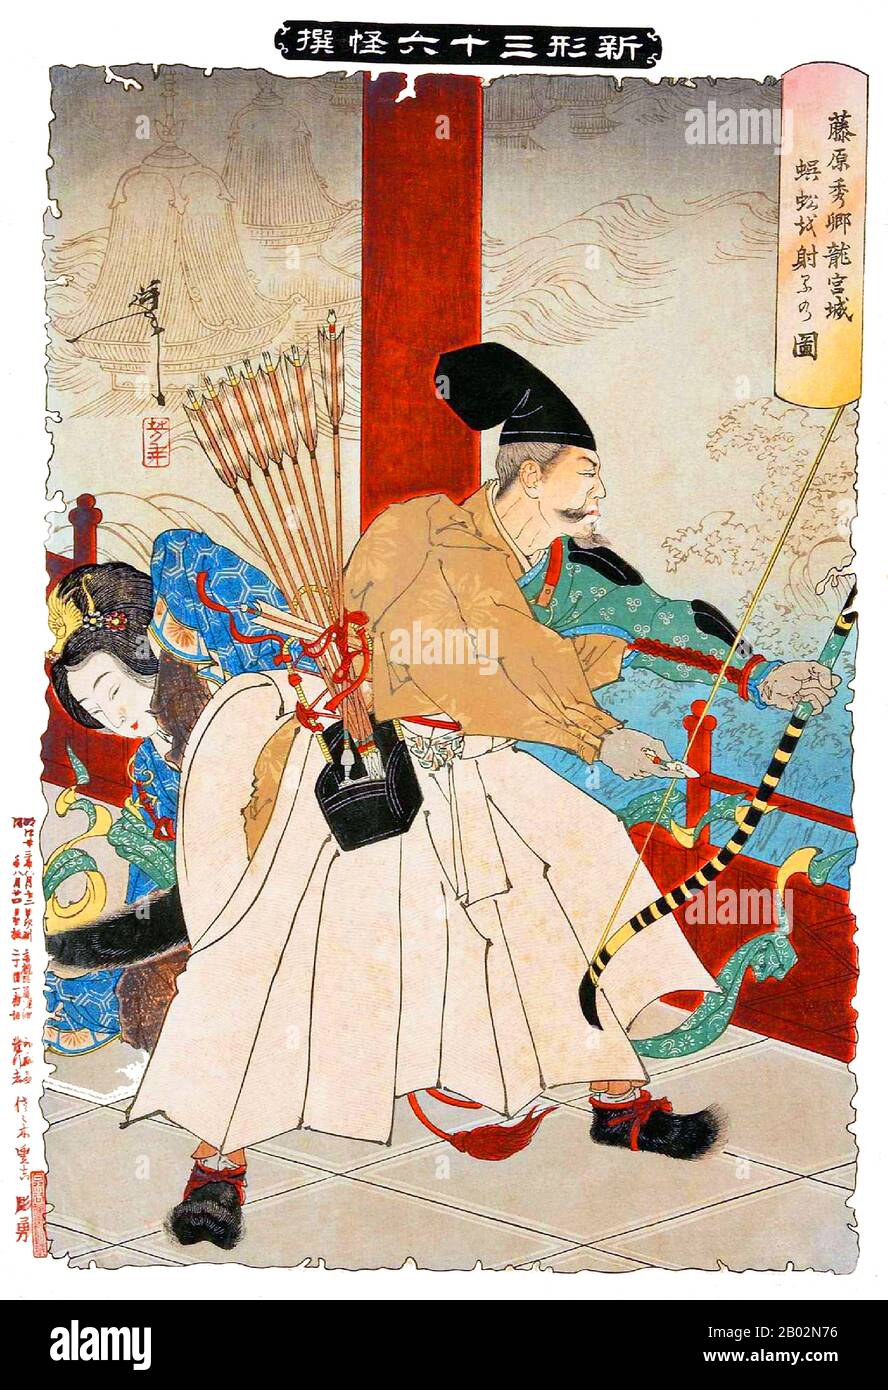 Fujiwara no Hidesato (藤原 秀郷?) was a kuge (court bureaucrat) of tenth century Heian Japan. He is famous for his military exploits and courage, and is regarded as the common ancestor of the Ōshū branch of the Fujiwara clan, the Yūki, Oyama, and Shimokōbe families.  Hidesato served under Emperor Suzaku, and fought alongside Taira no Sadamori in 940 in suppressing the revolt of Taira no Masakado. His prayer for victory before this battle is commemorated in the Kachiya Festival. Hidesato was then appointed Chinjufu-shogun (Defender of the North) and Governor of Shimotsuke Province.  Emperor Suzaku Stock Photo